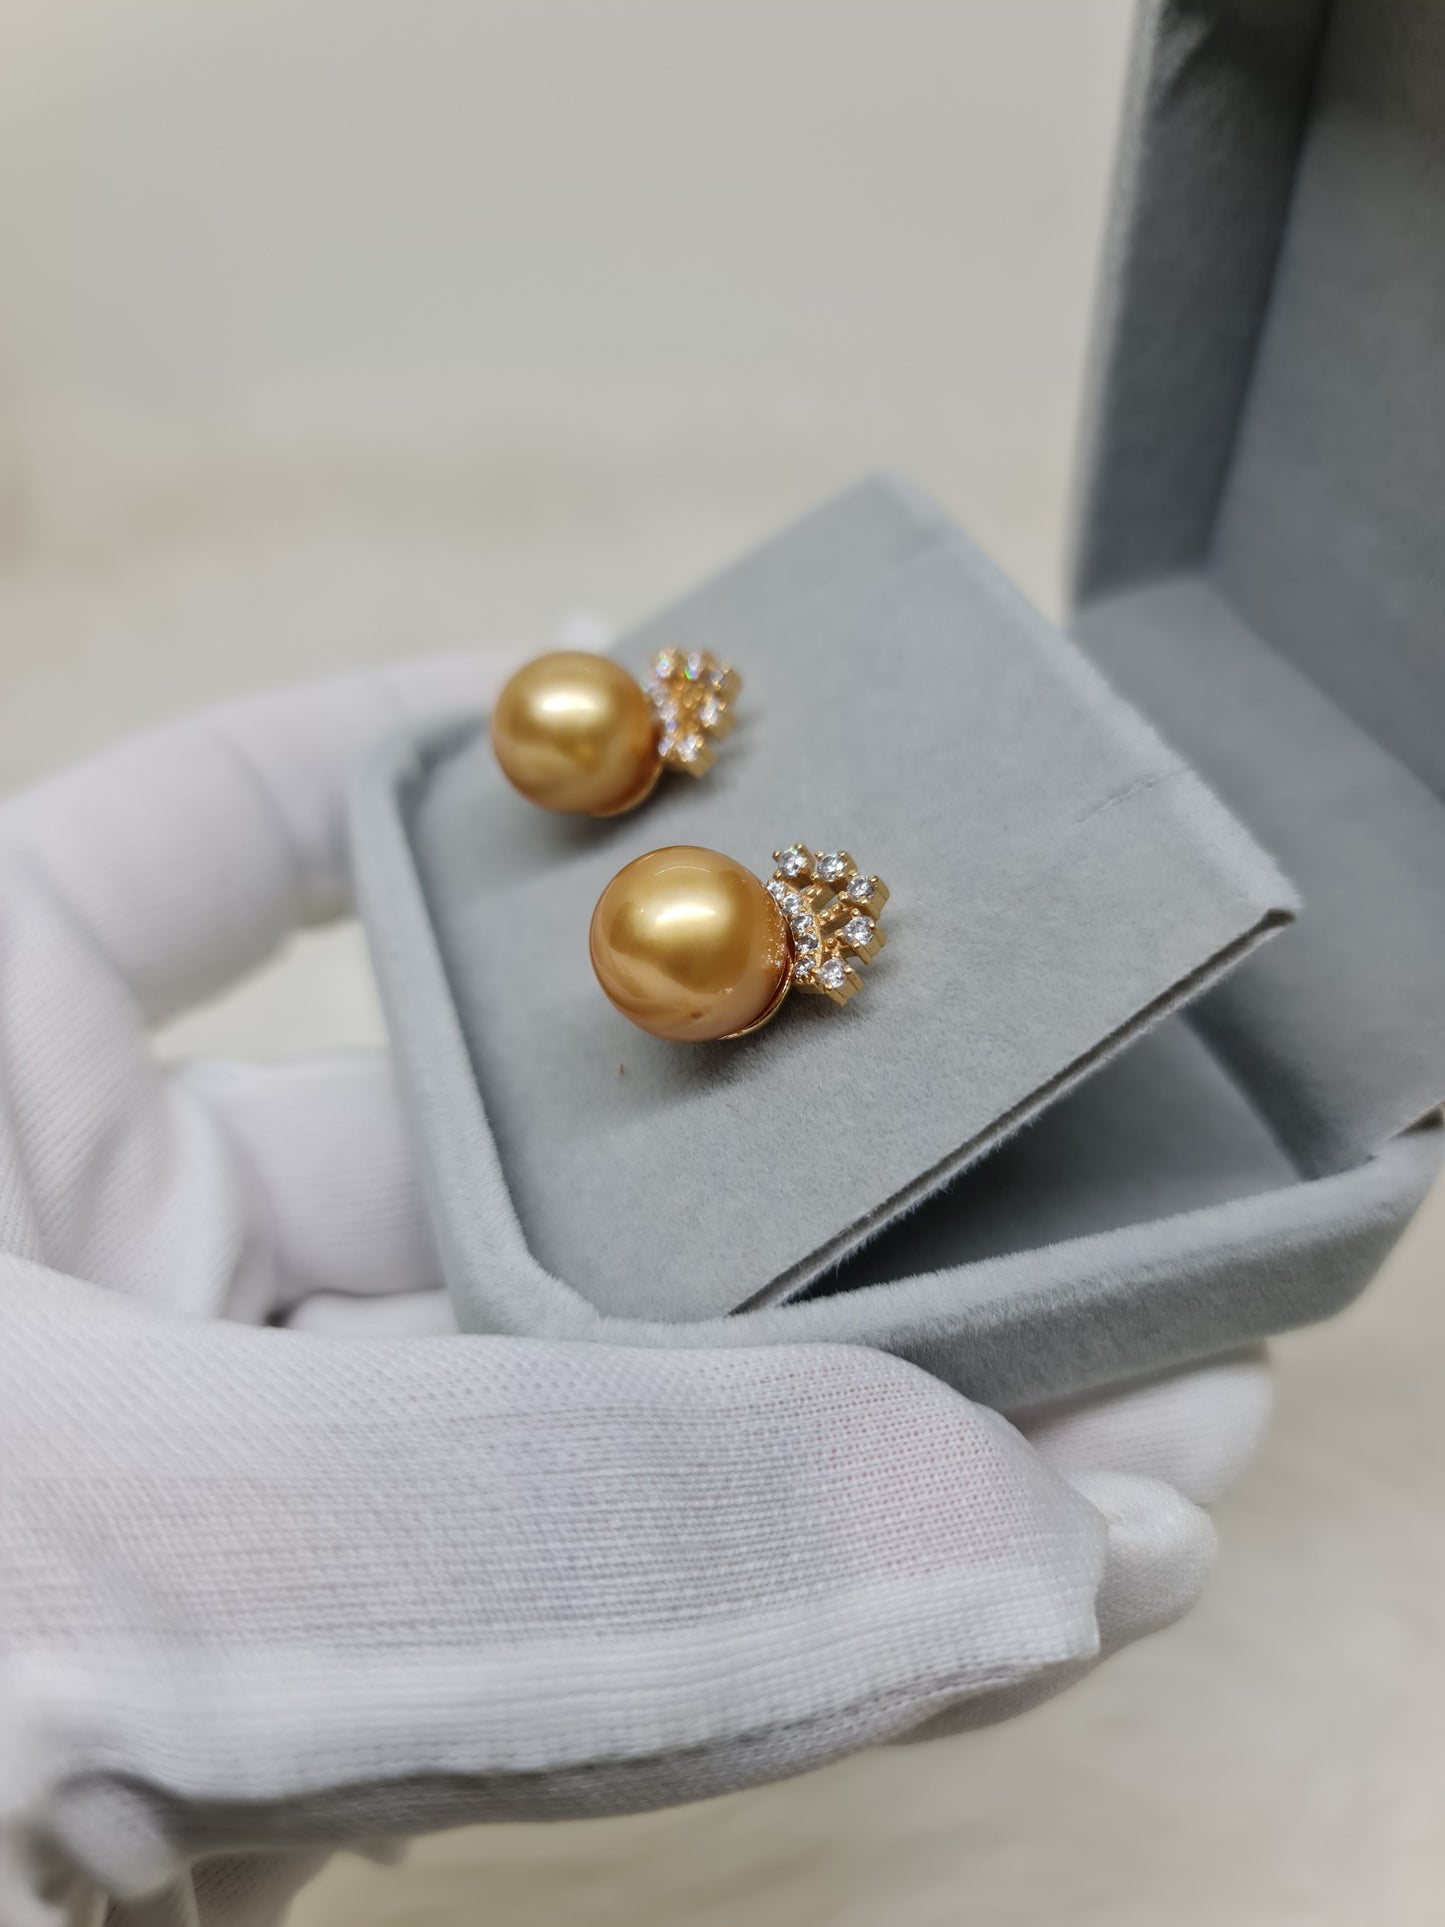 12mm Deep Golden South Sea Pearls Earrings in Gold Plated